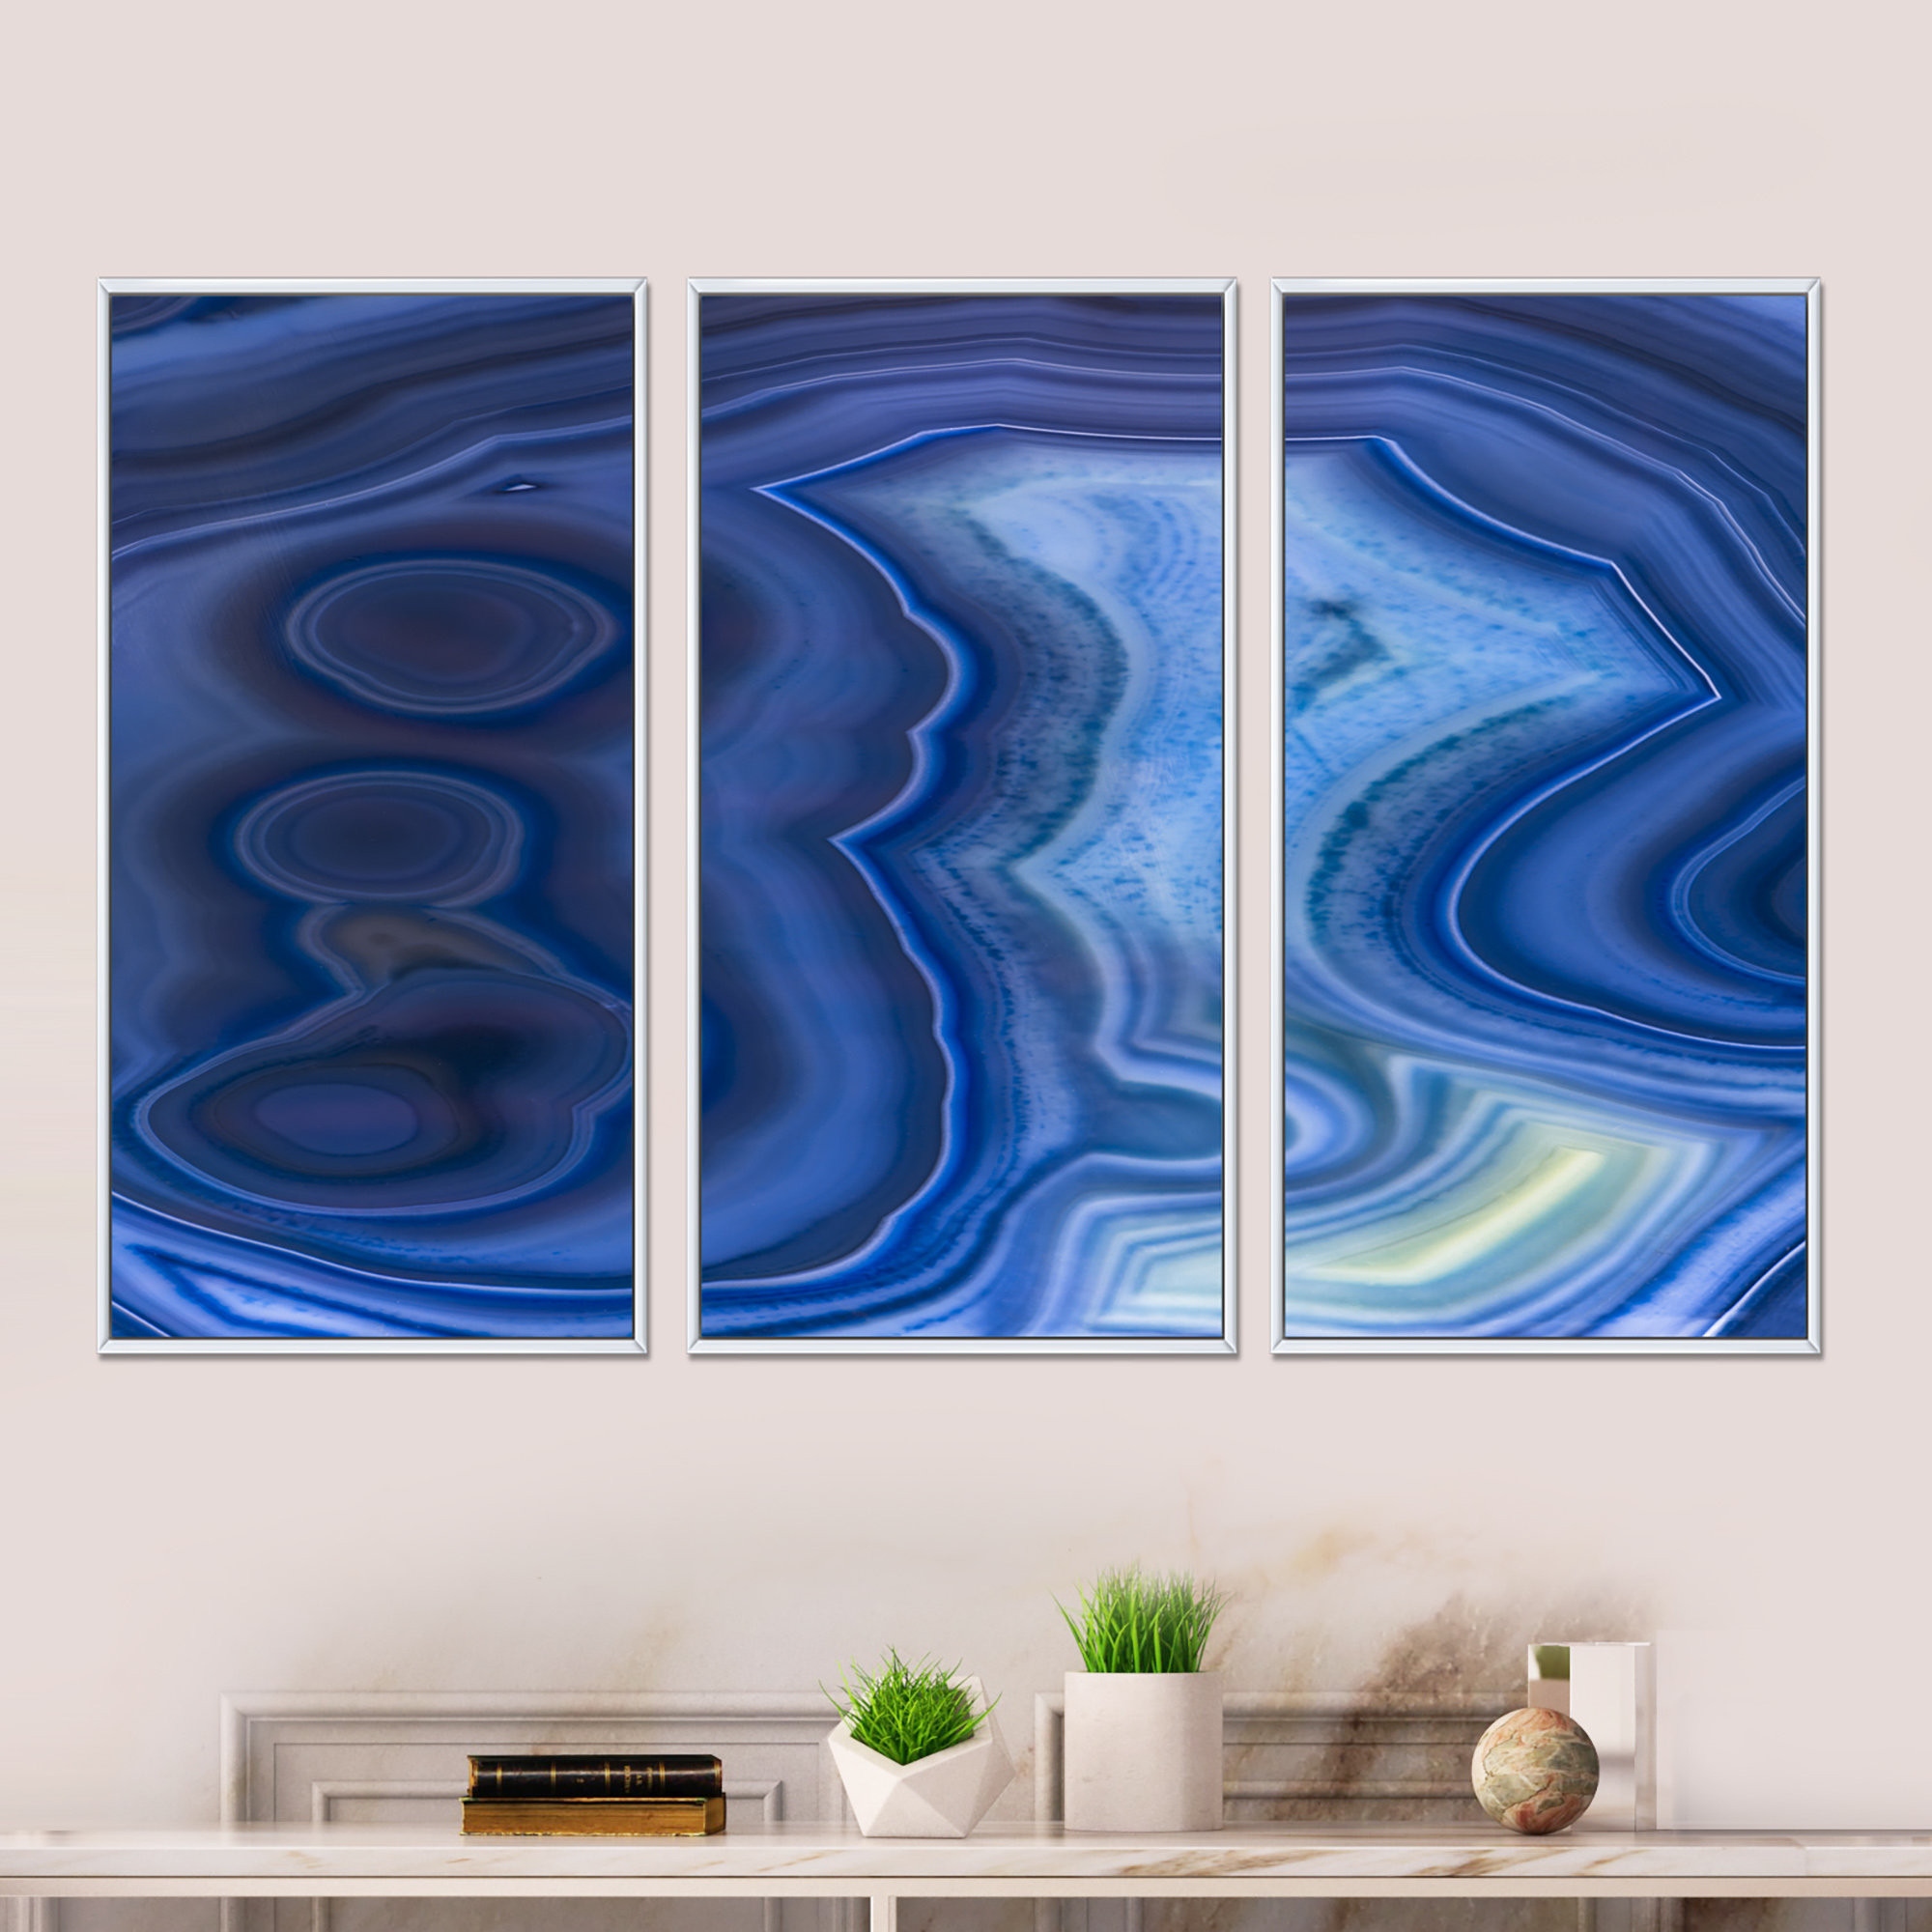 Blue Agate Stone Design - 3 Piece Floater Frame Painting on Canvas Wrought Studio